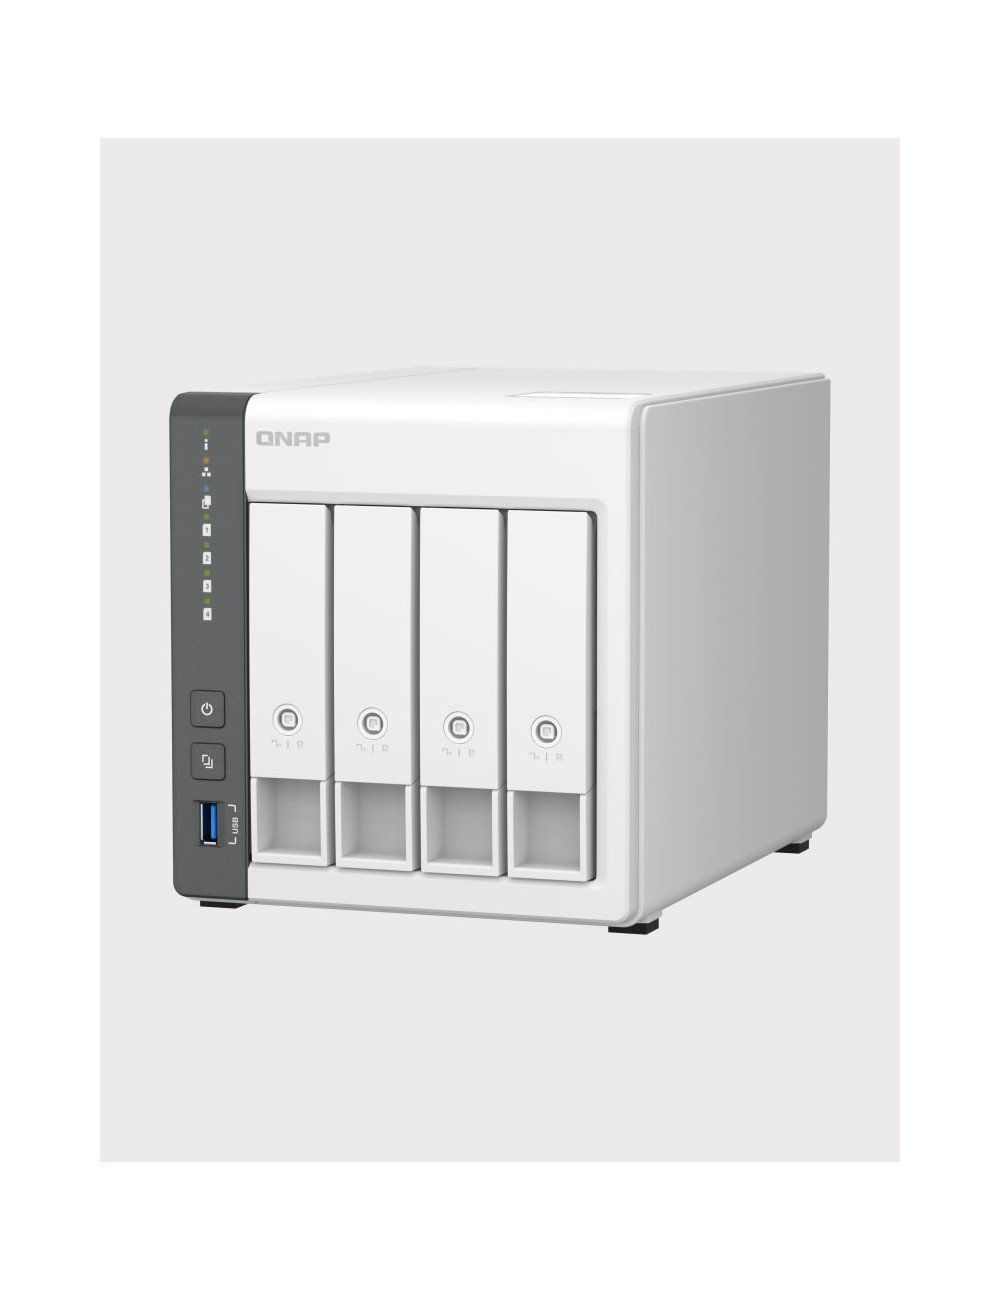 Synology DX517 Unité d'extension IRONWOLF PRO 80To (5x16To)